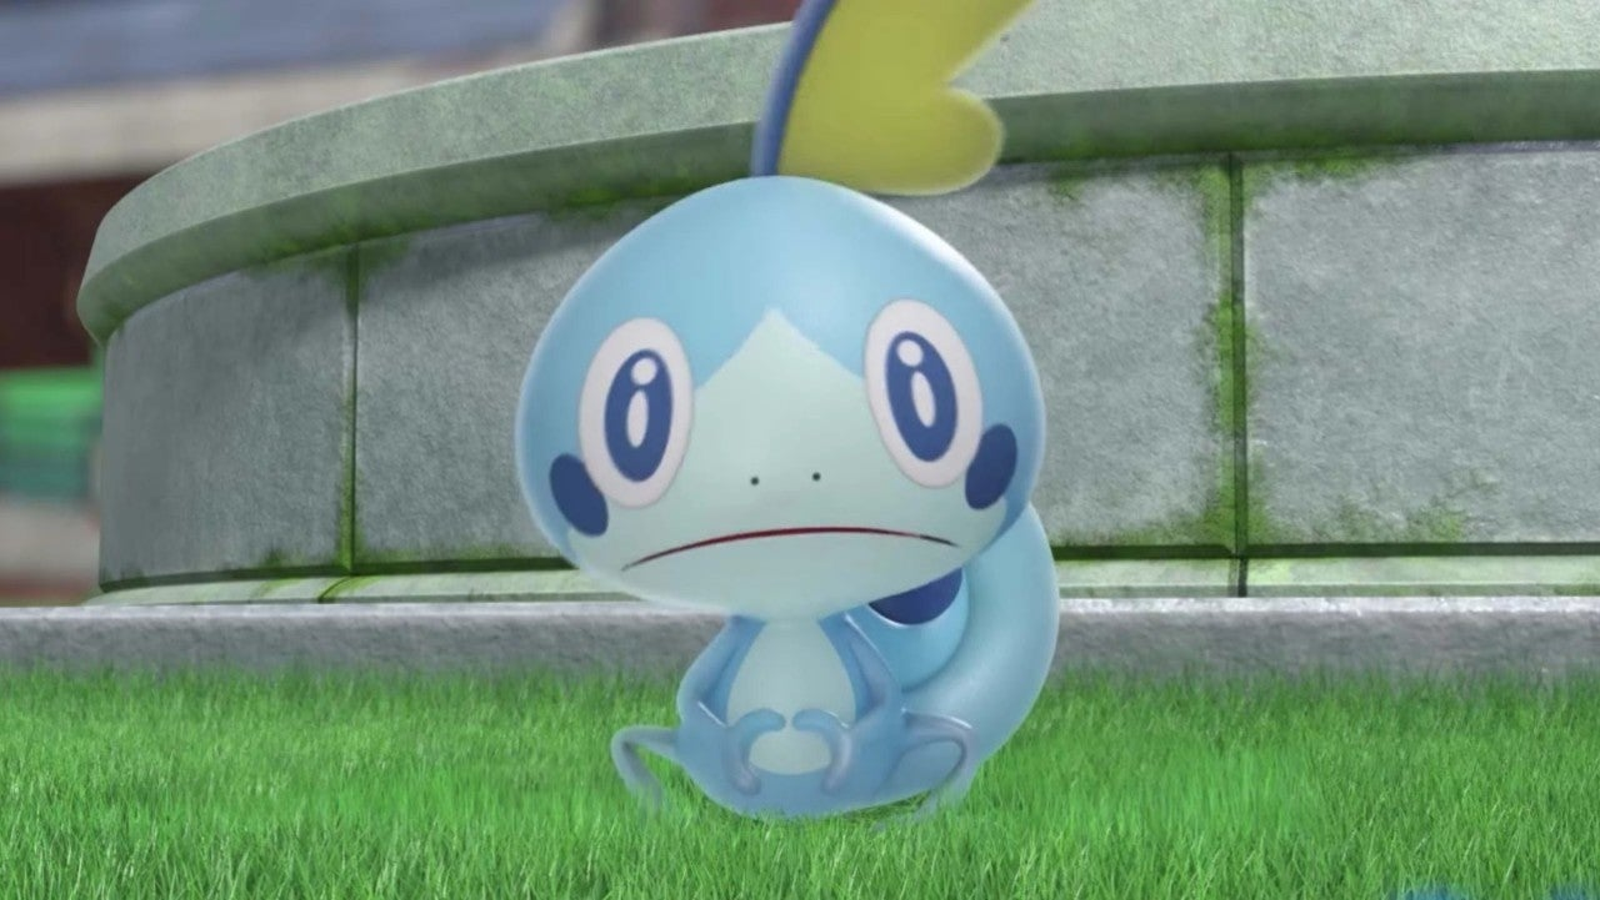 Nintendo Publicly Blacklists Video Game Site Over 'Pokémon Sword And  Shield' Leaks